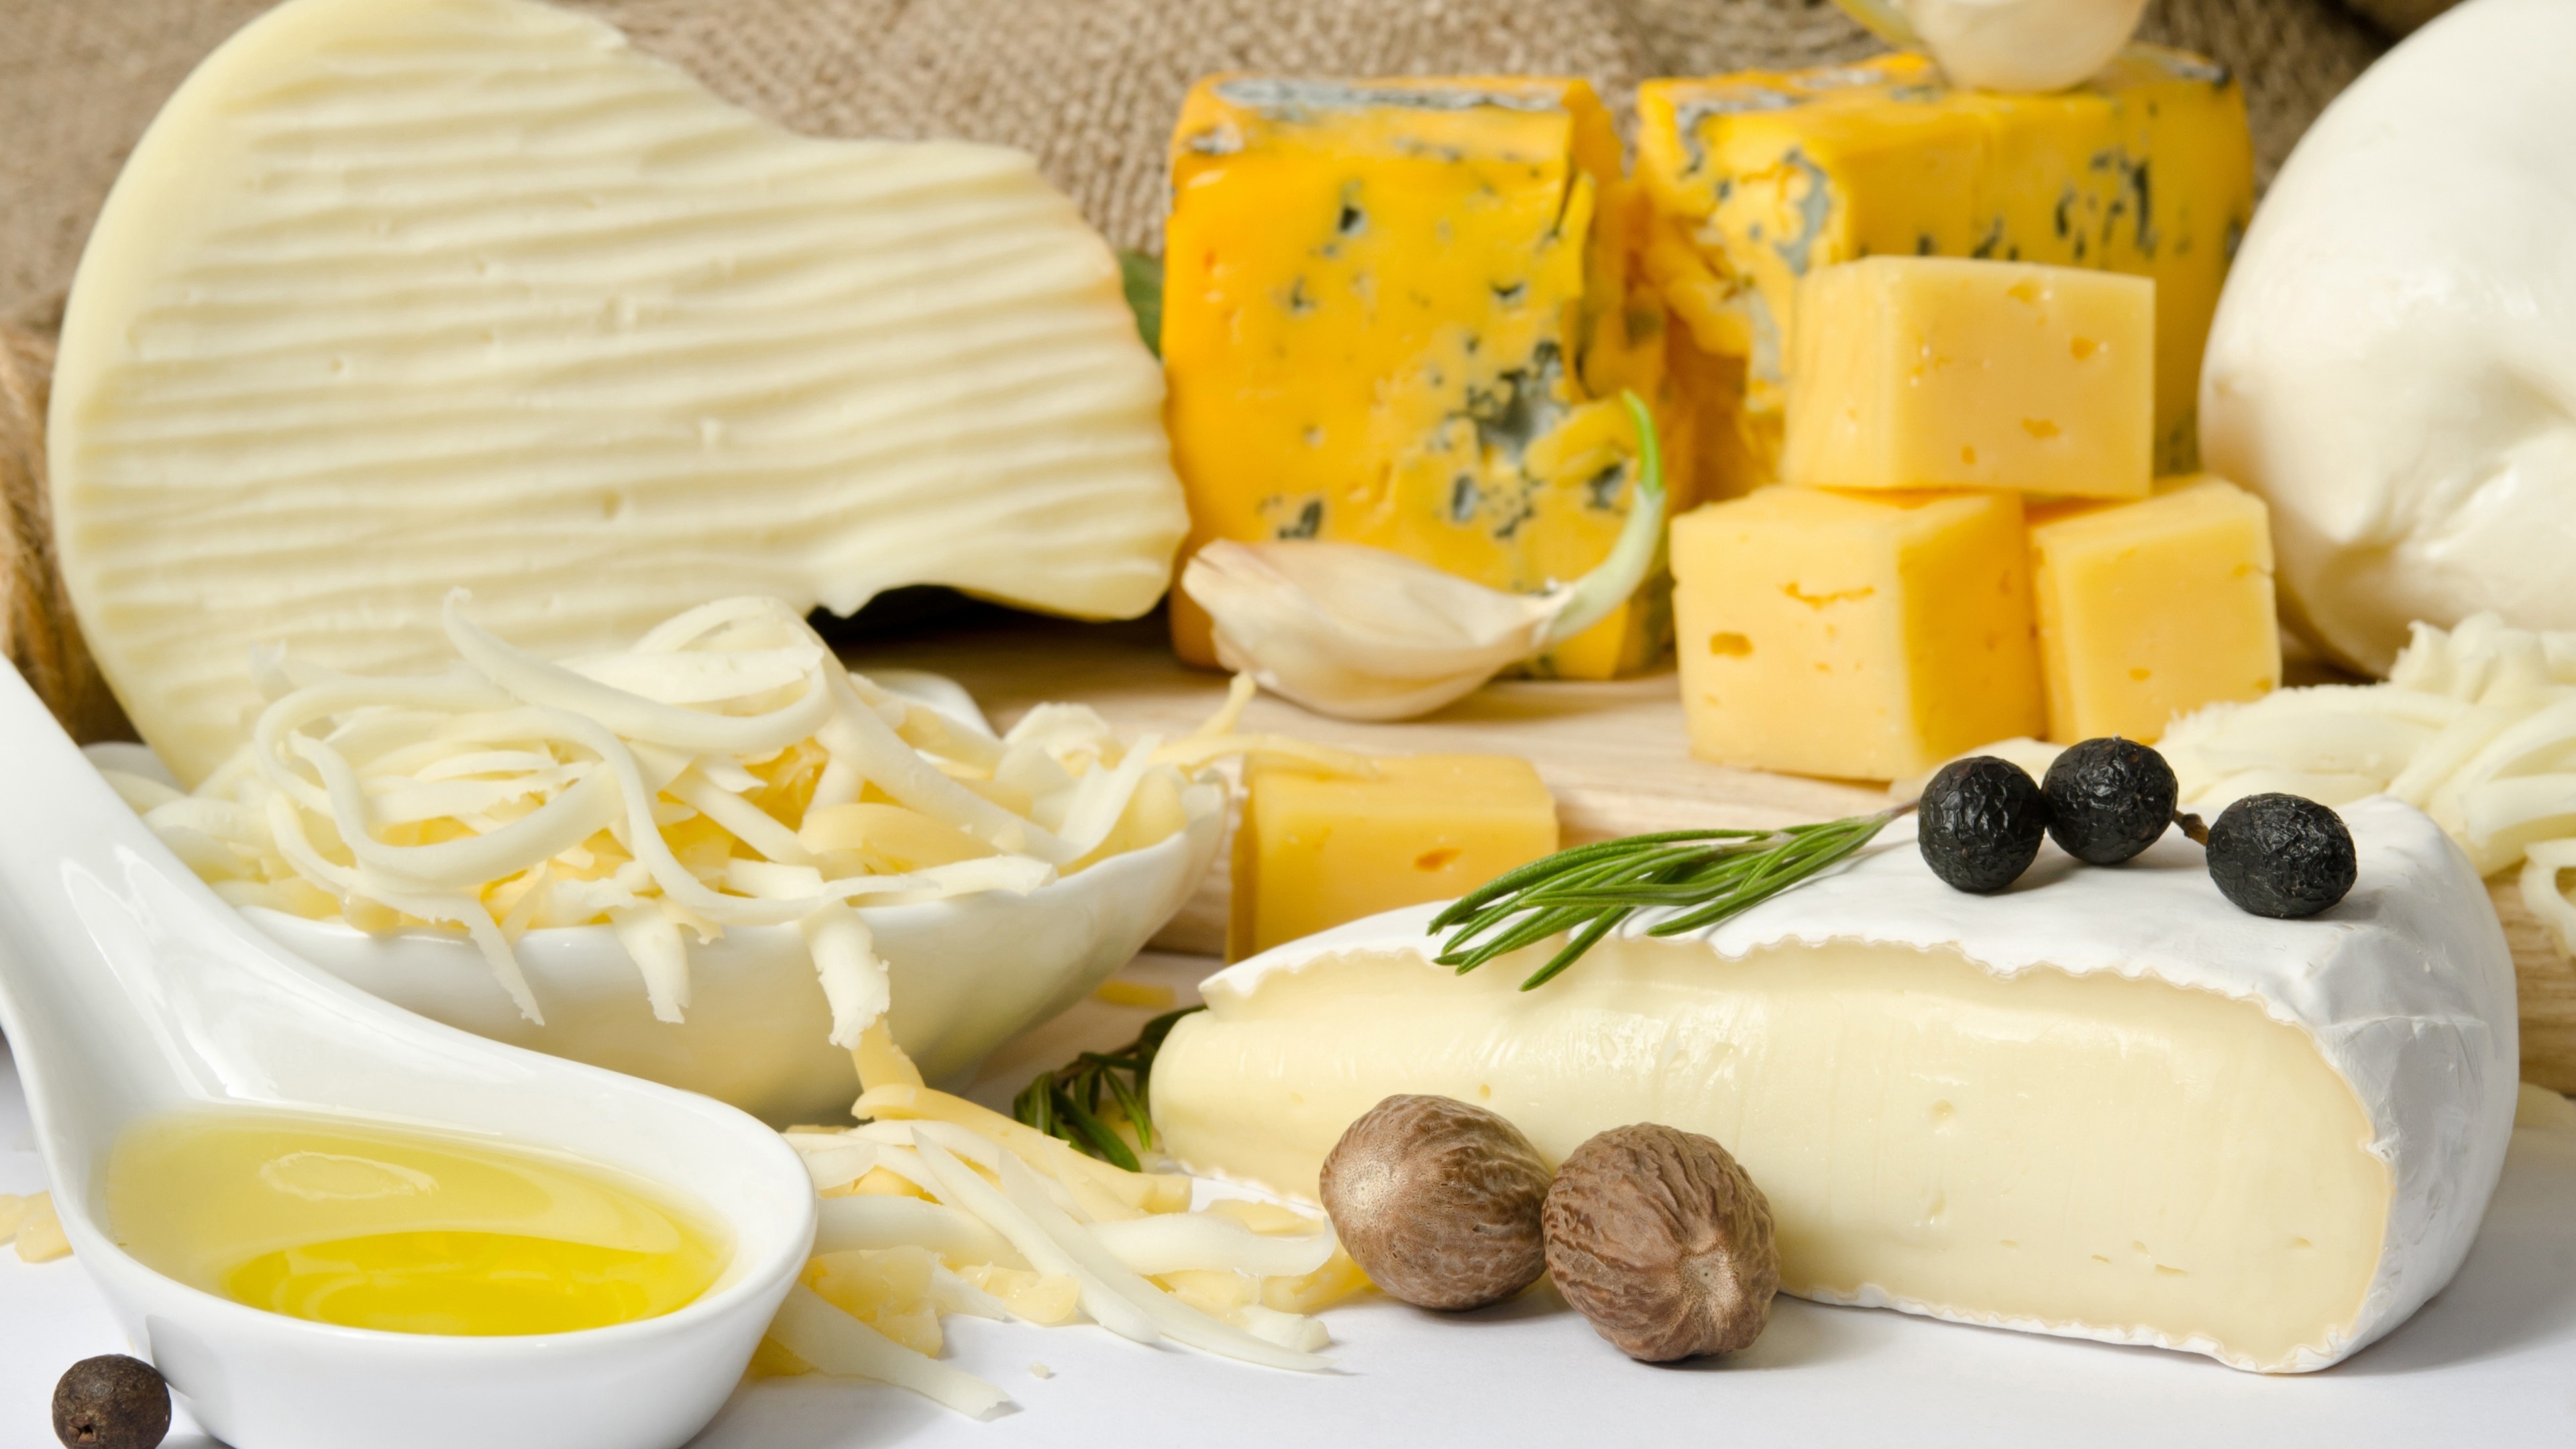 Cheese: Comprises proteins and fat from milk, Gorgonzola. 3840x2160 4K Background.